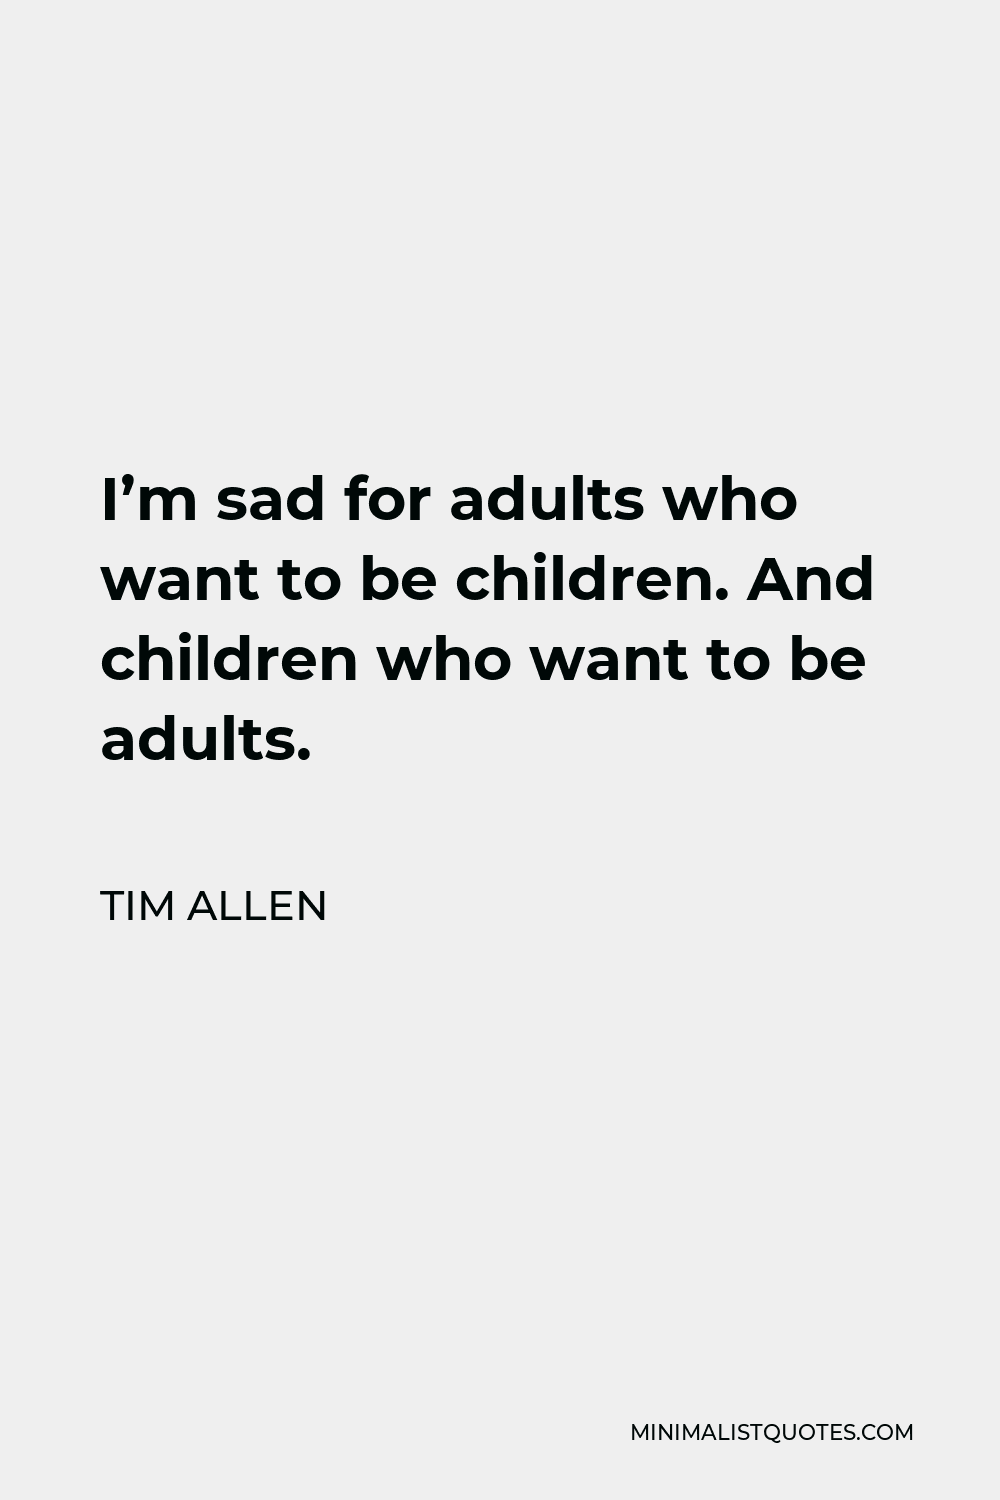 Tim Allen Quote - I’m sad for adults who want to be children. And children who want to be adults.